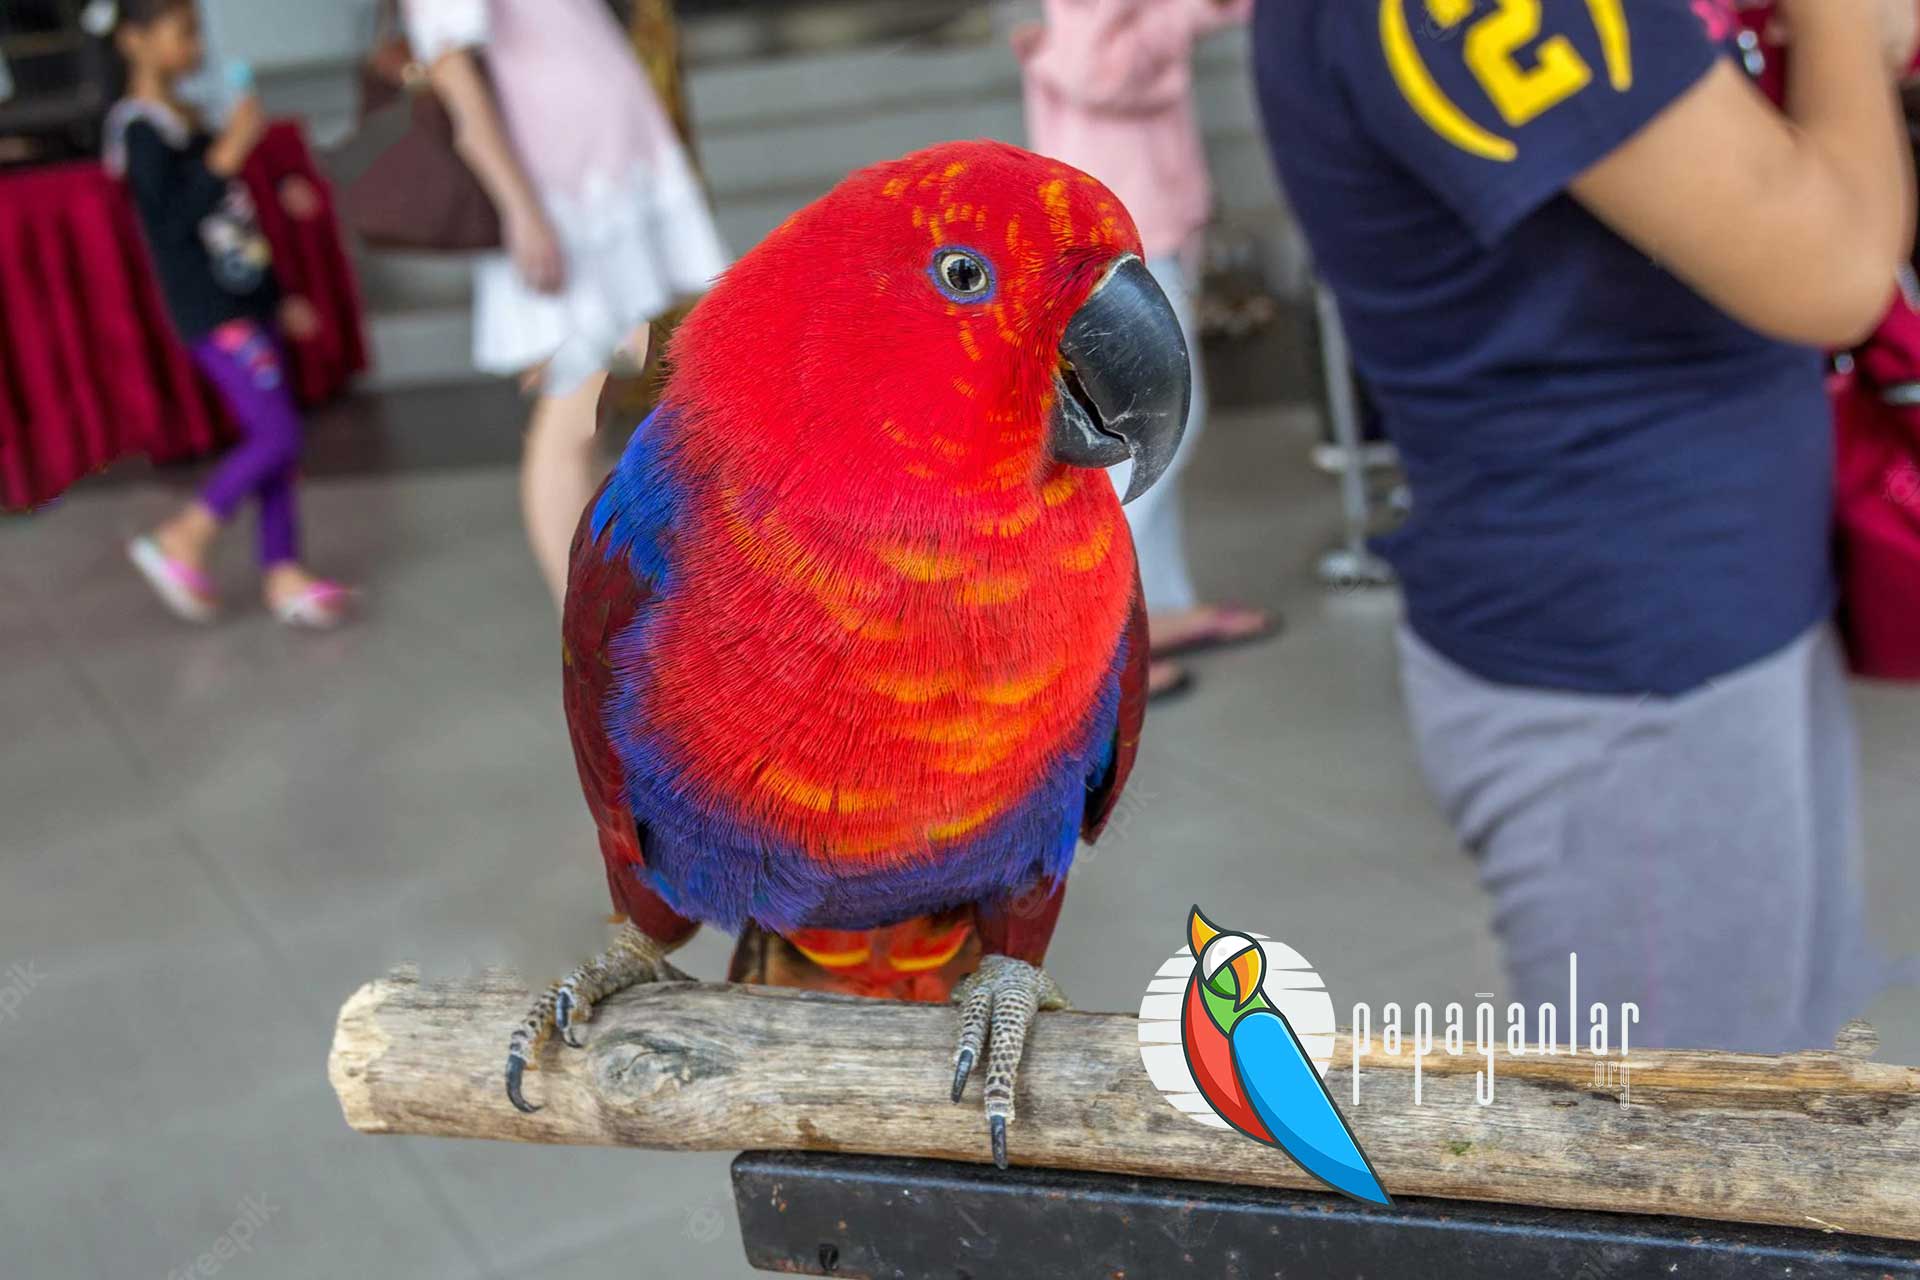 Eclectus parrot prices 2022